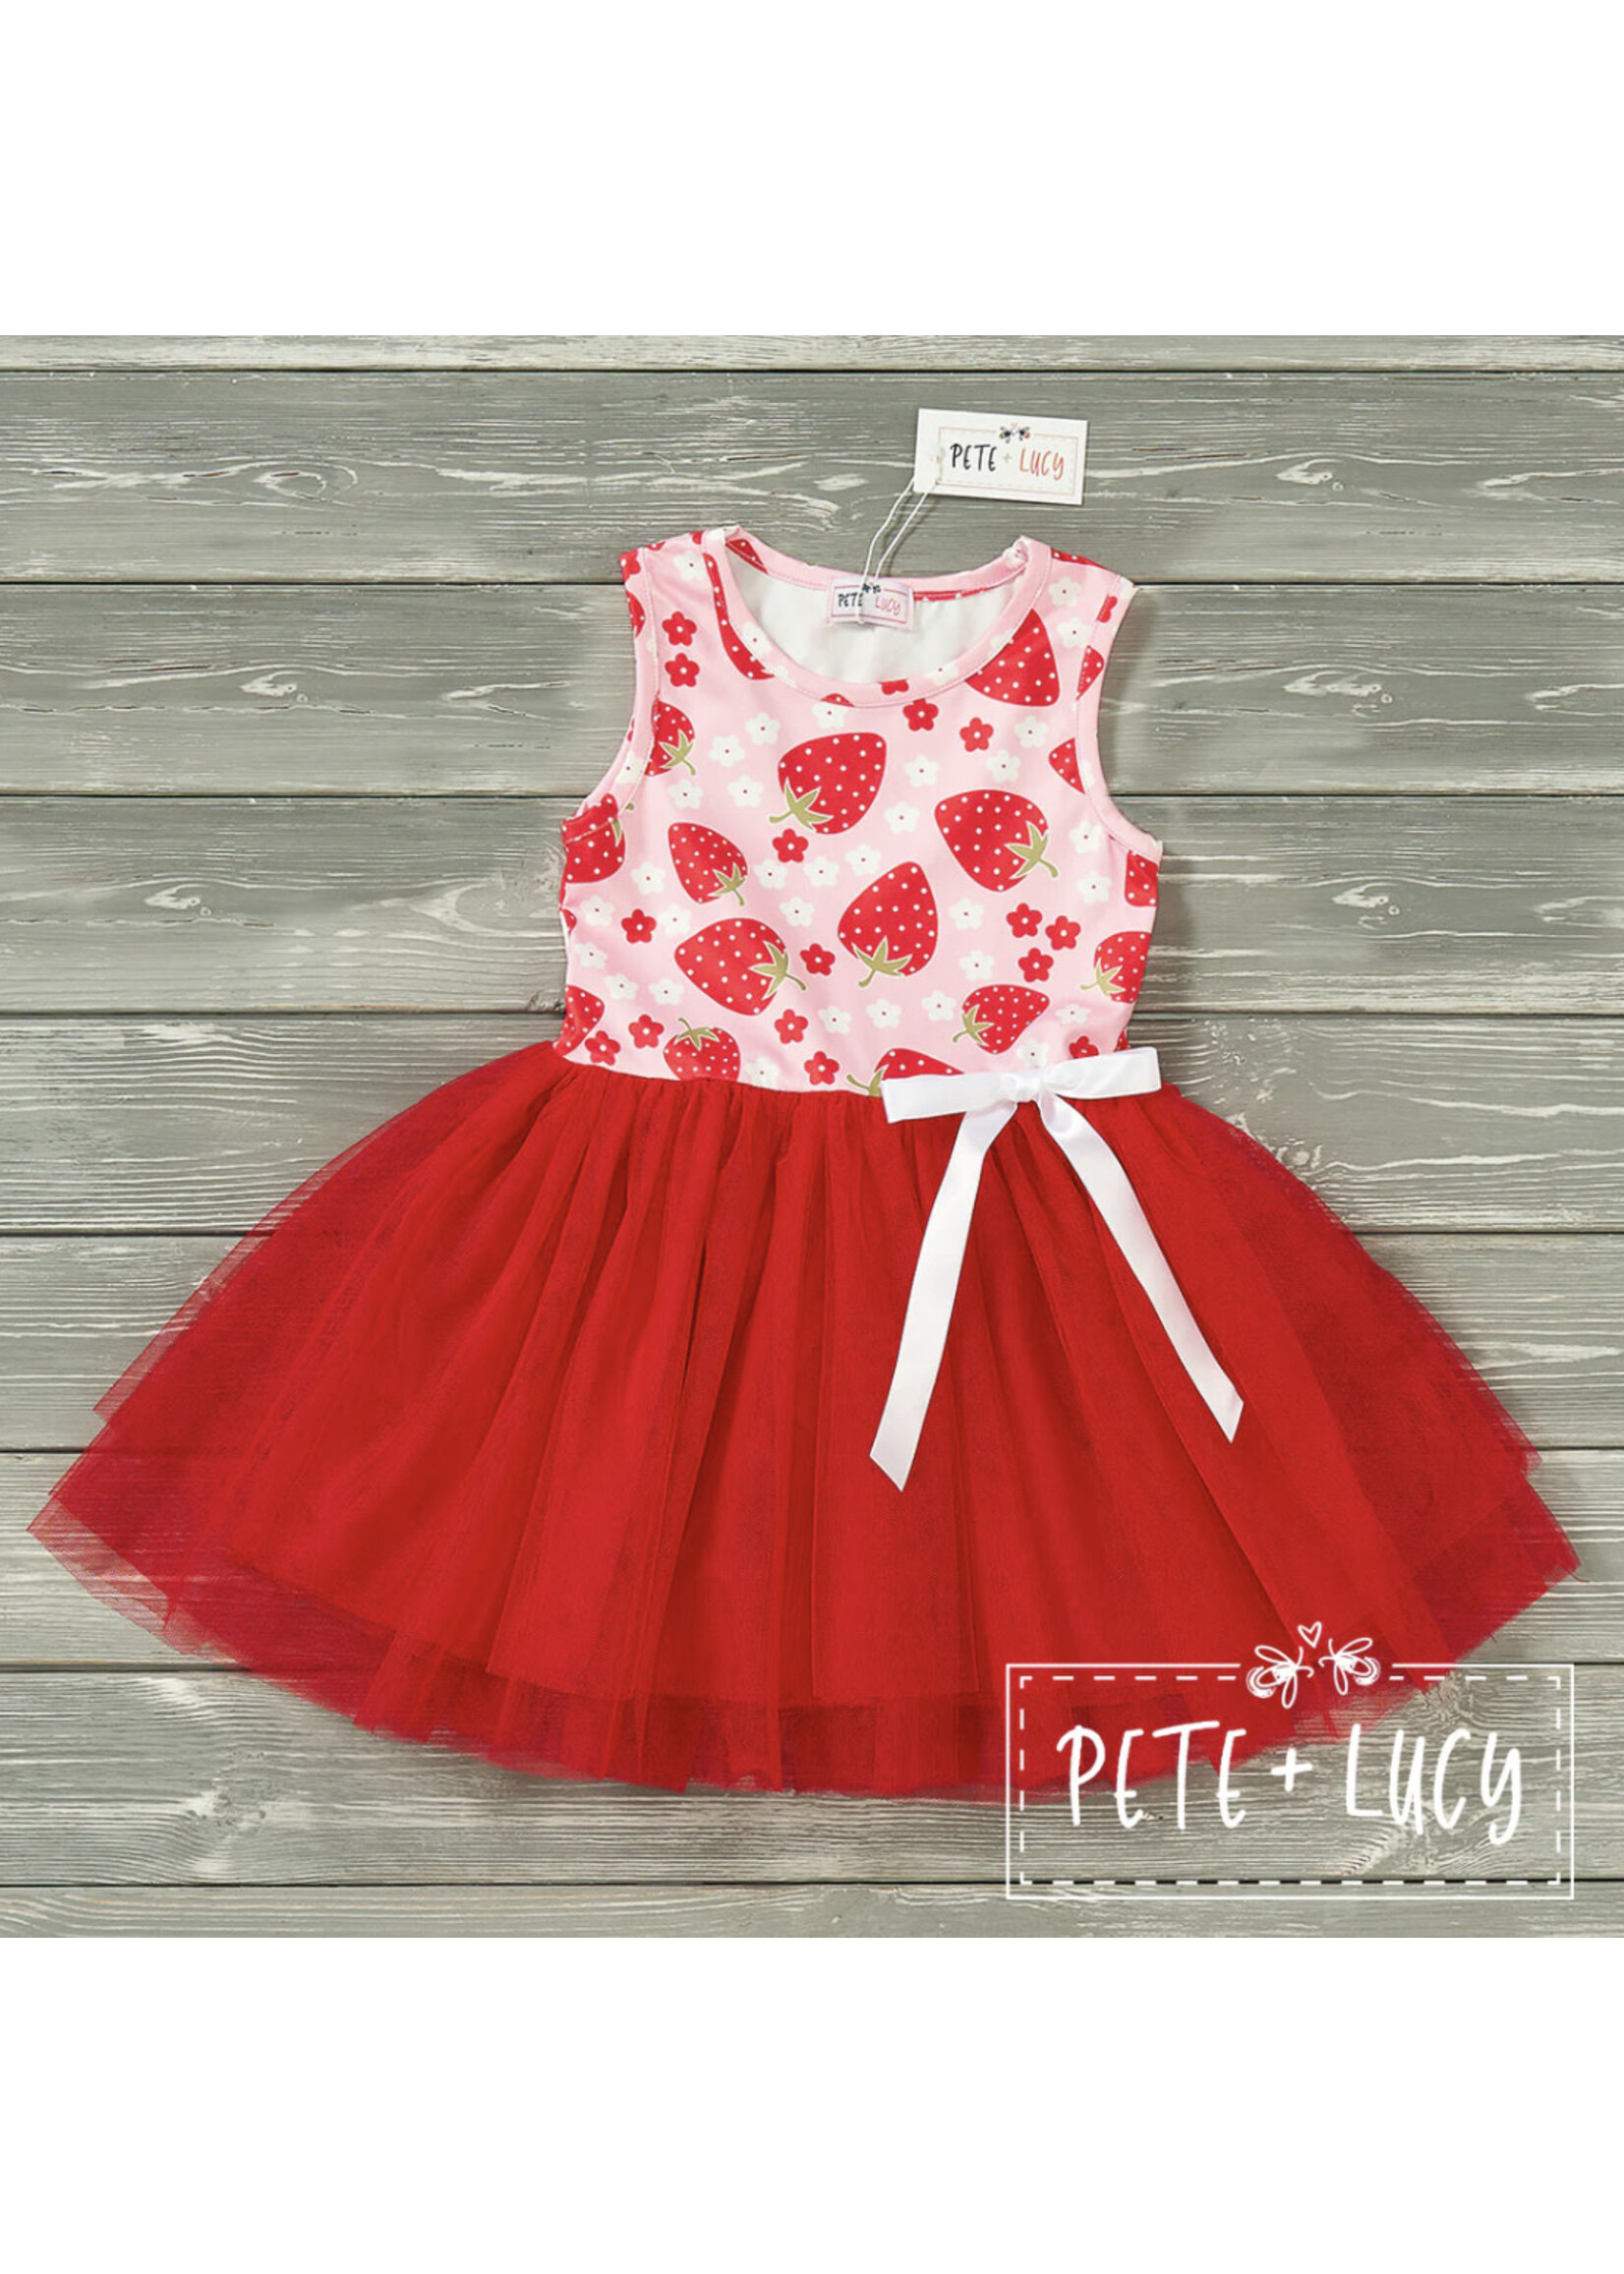 Pete & Lucy Sweet One Tulle Dress